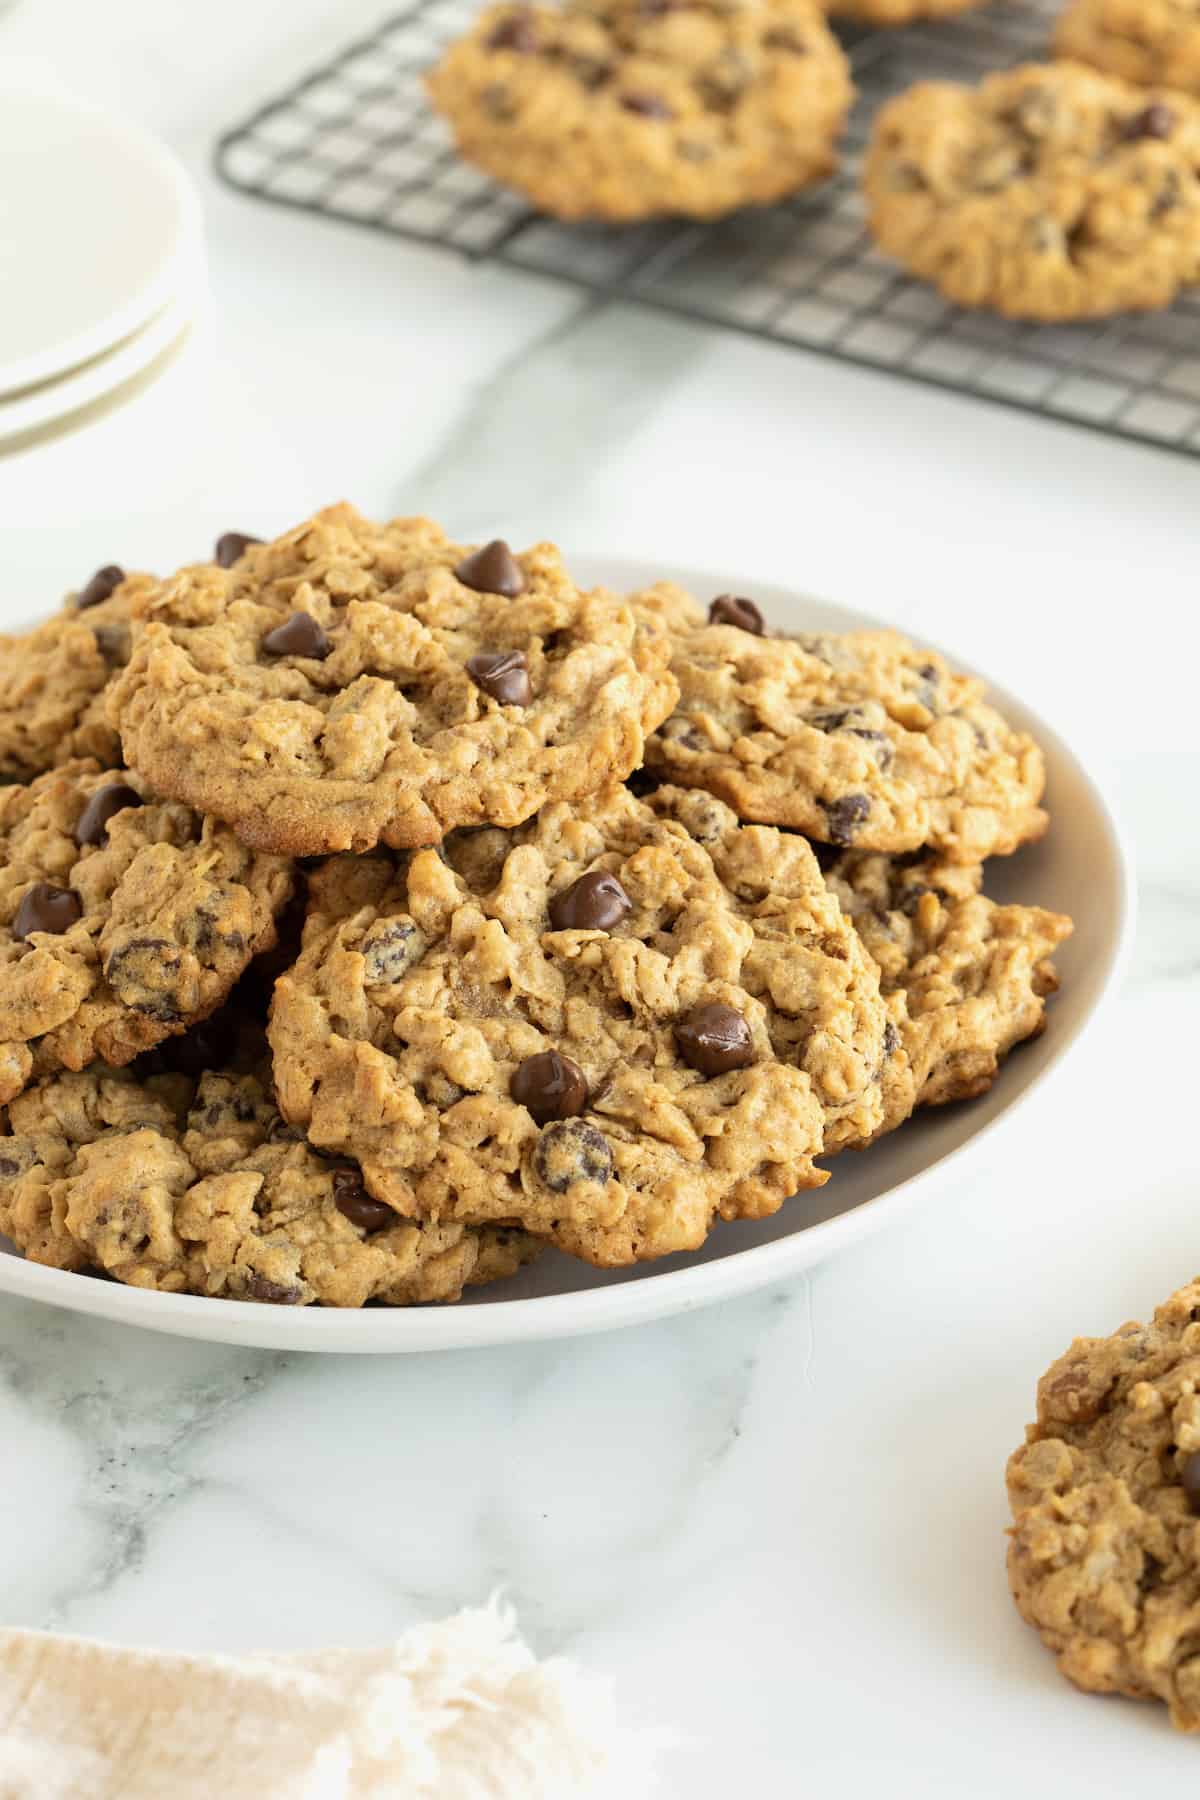 Flourless oatmeal chocolate chip cookies on a white porcelain plate.